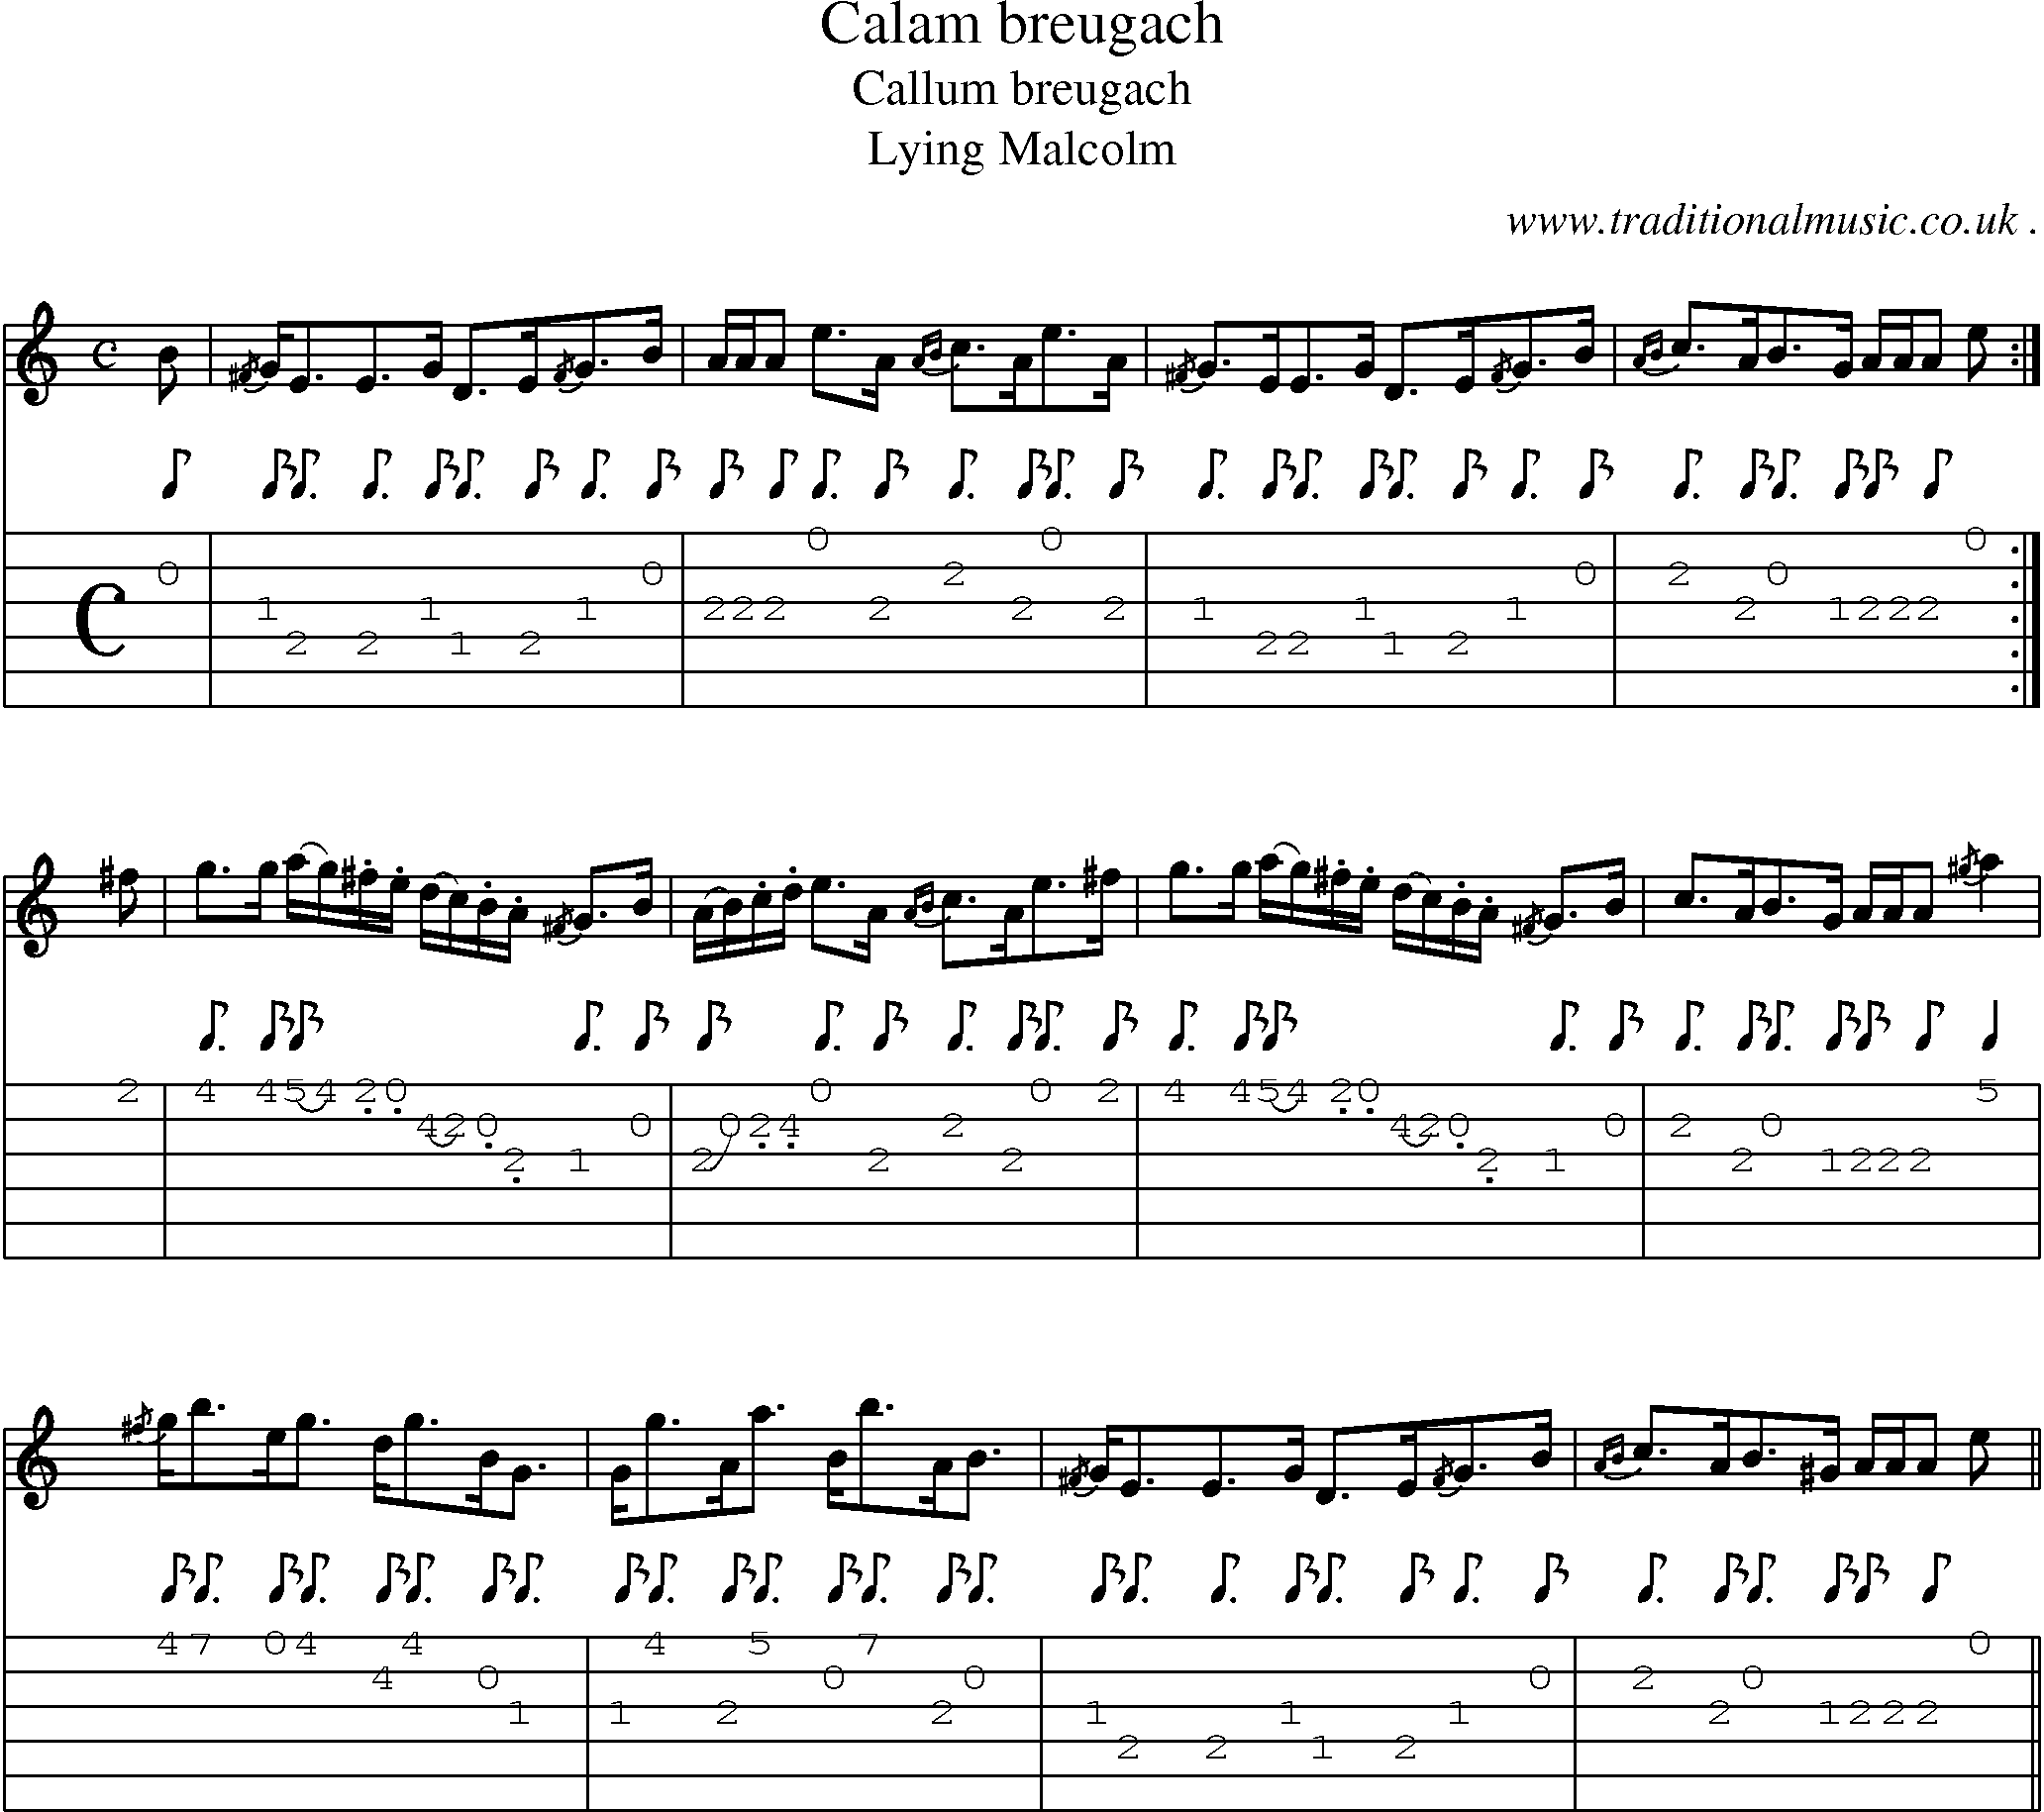 Sheet-music  score, Chords and Guitar Tabs for Calam Breugach